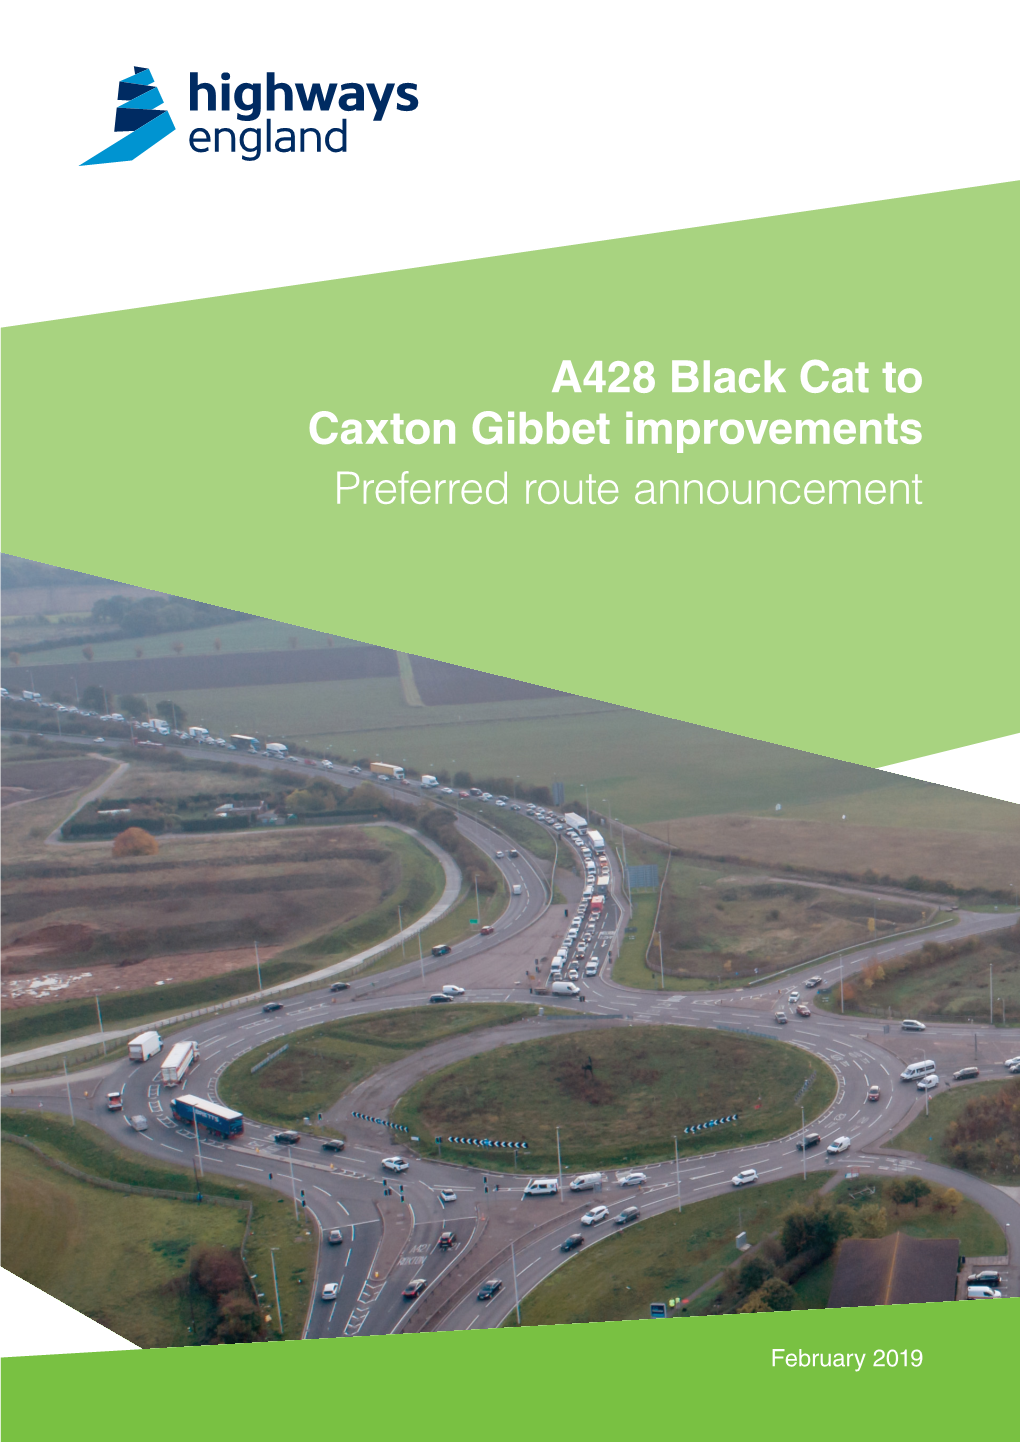 A428 Black Cat to Caxton Gibbet Improvements Preferred Route Announcement